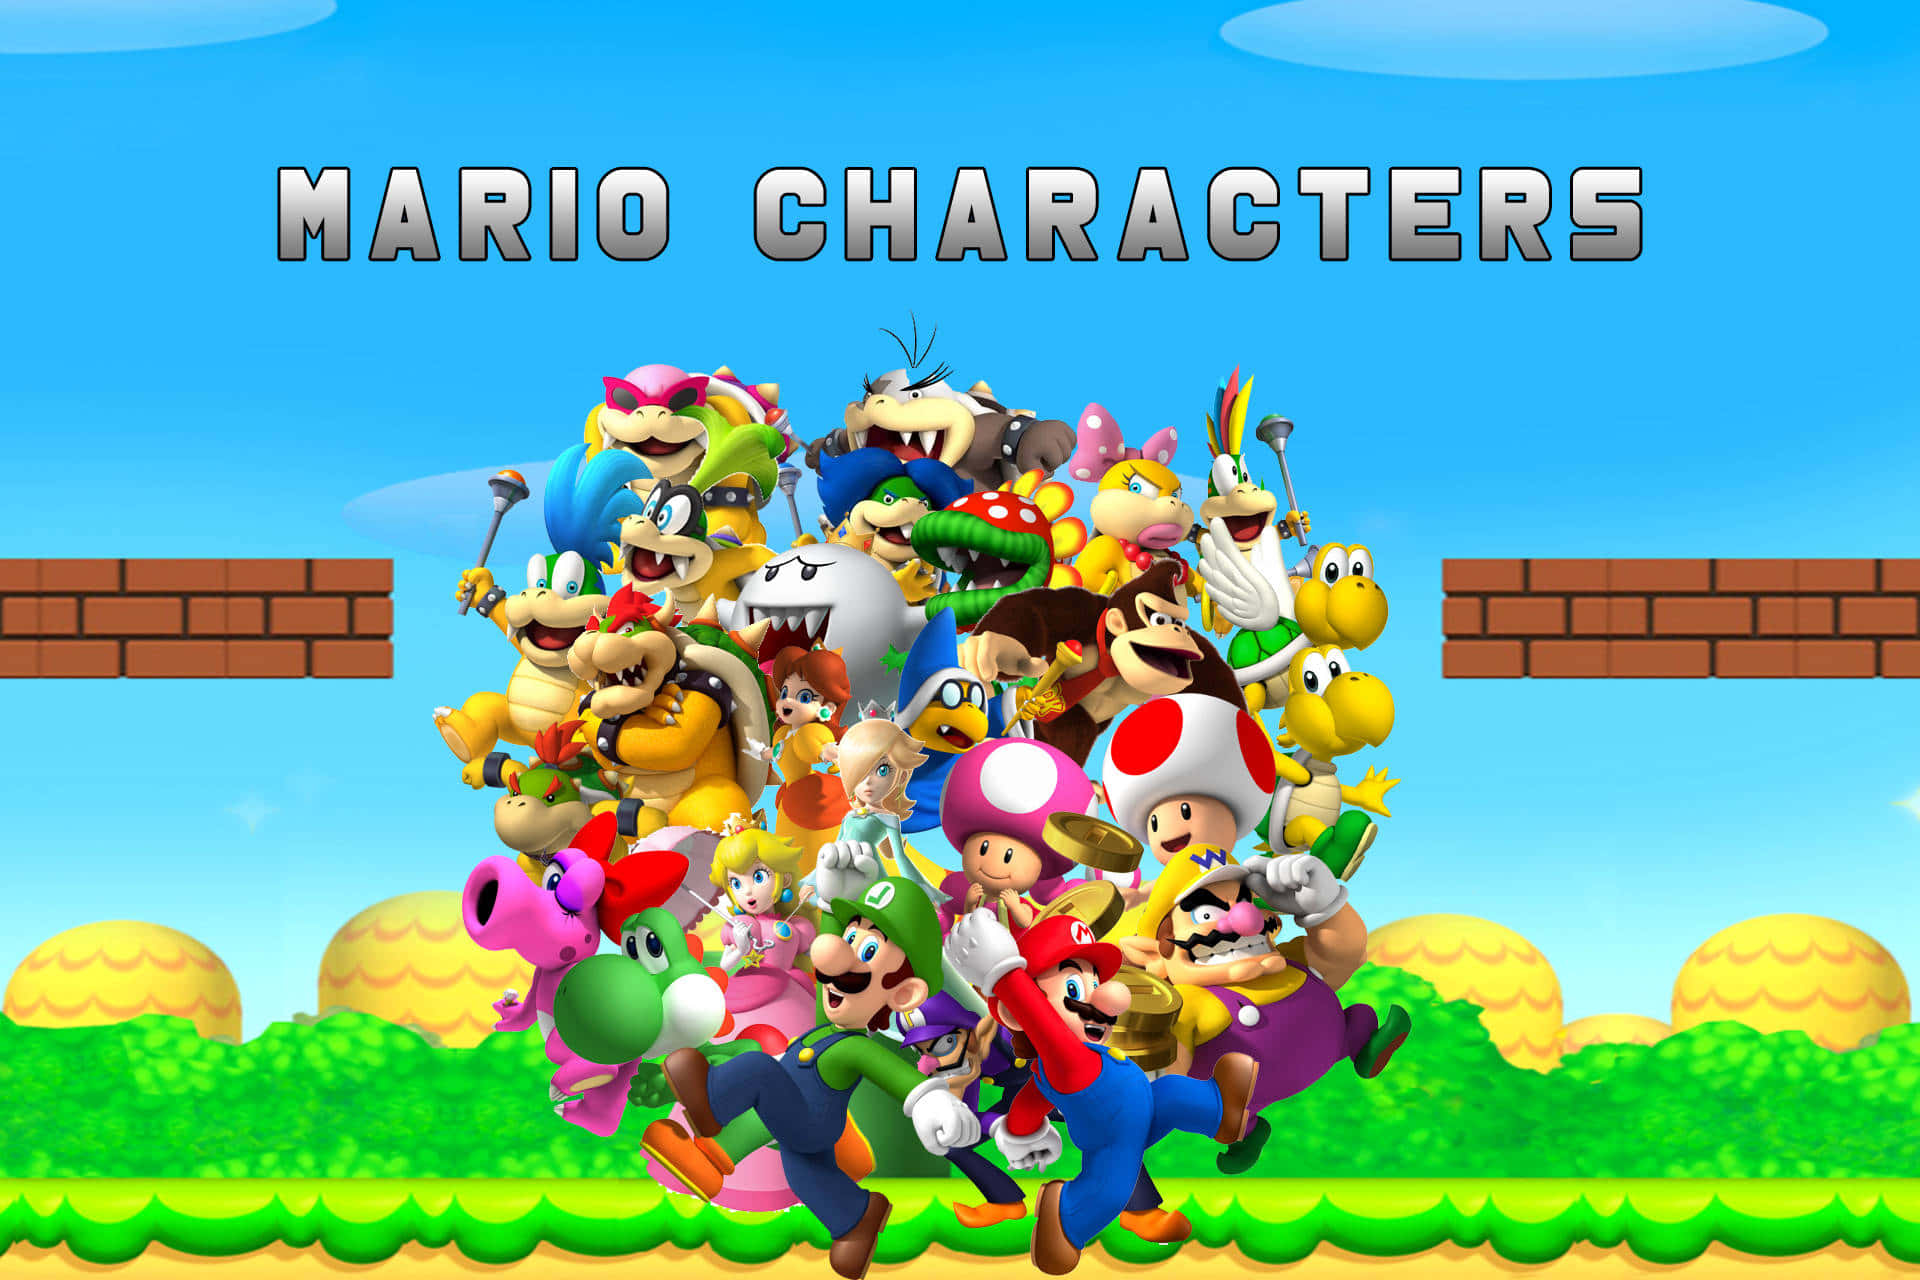 Super Mario Characters Assembled in a Colorful Group Wallpaper